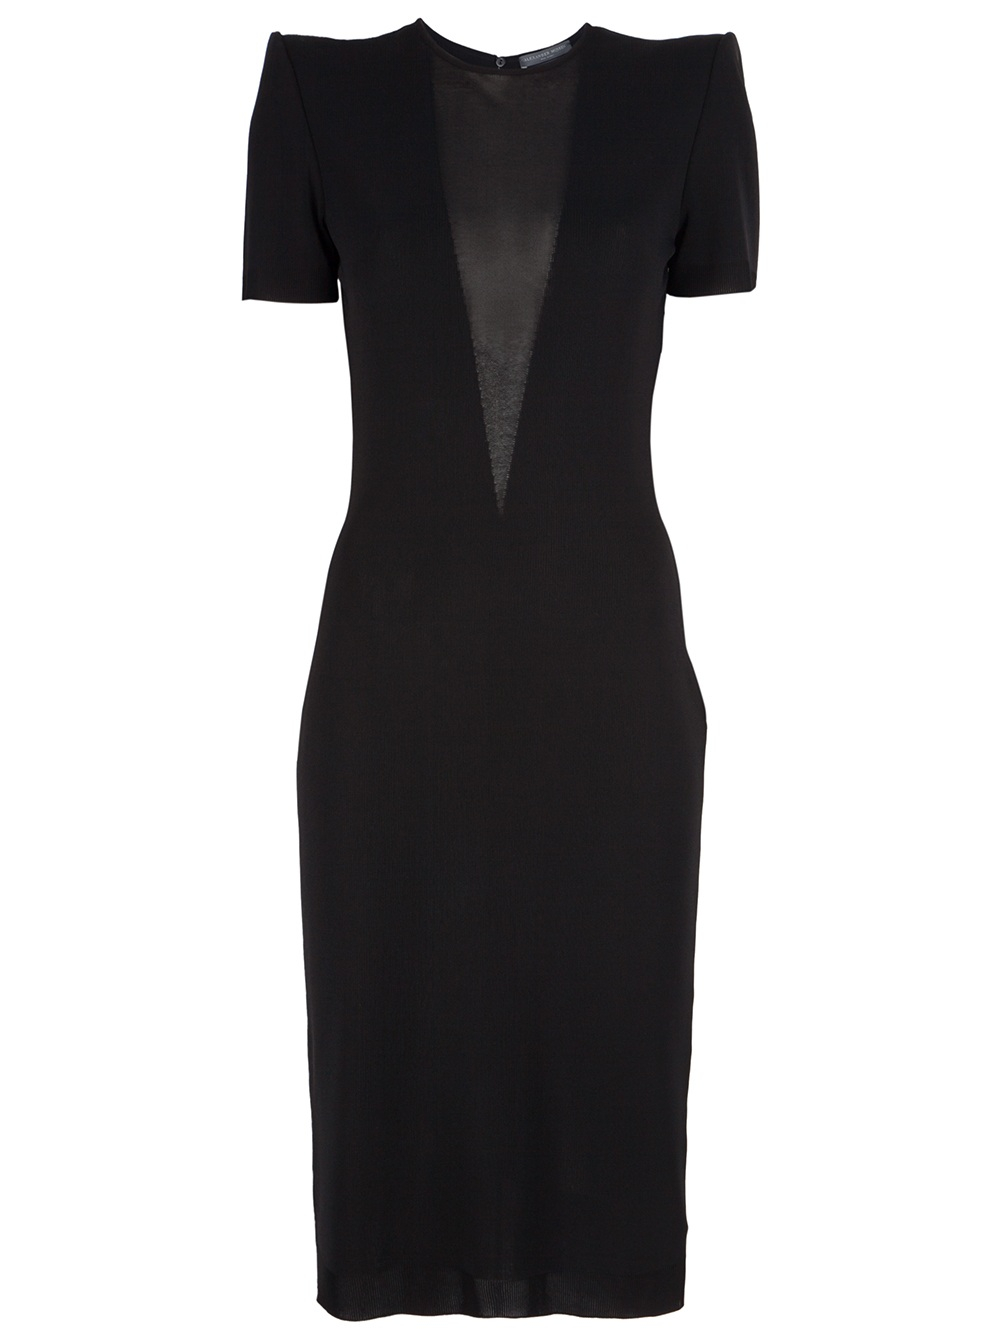 Lyst - Alexander mcqueen Mesh Panel Fitted Dress in Black